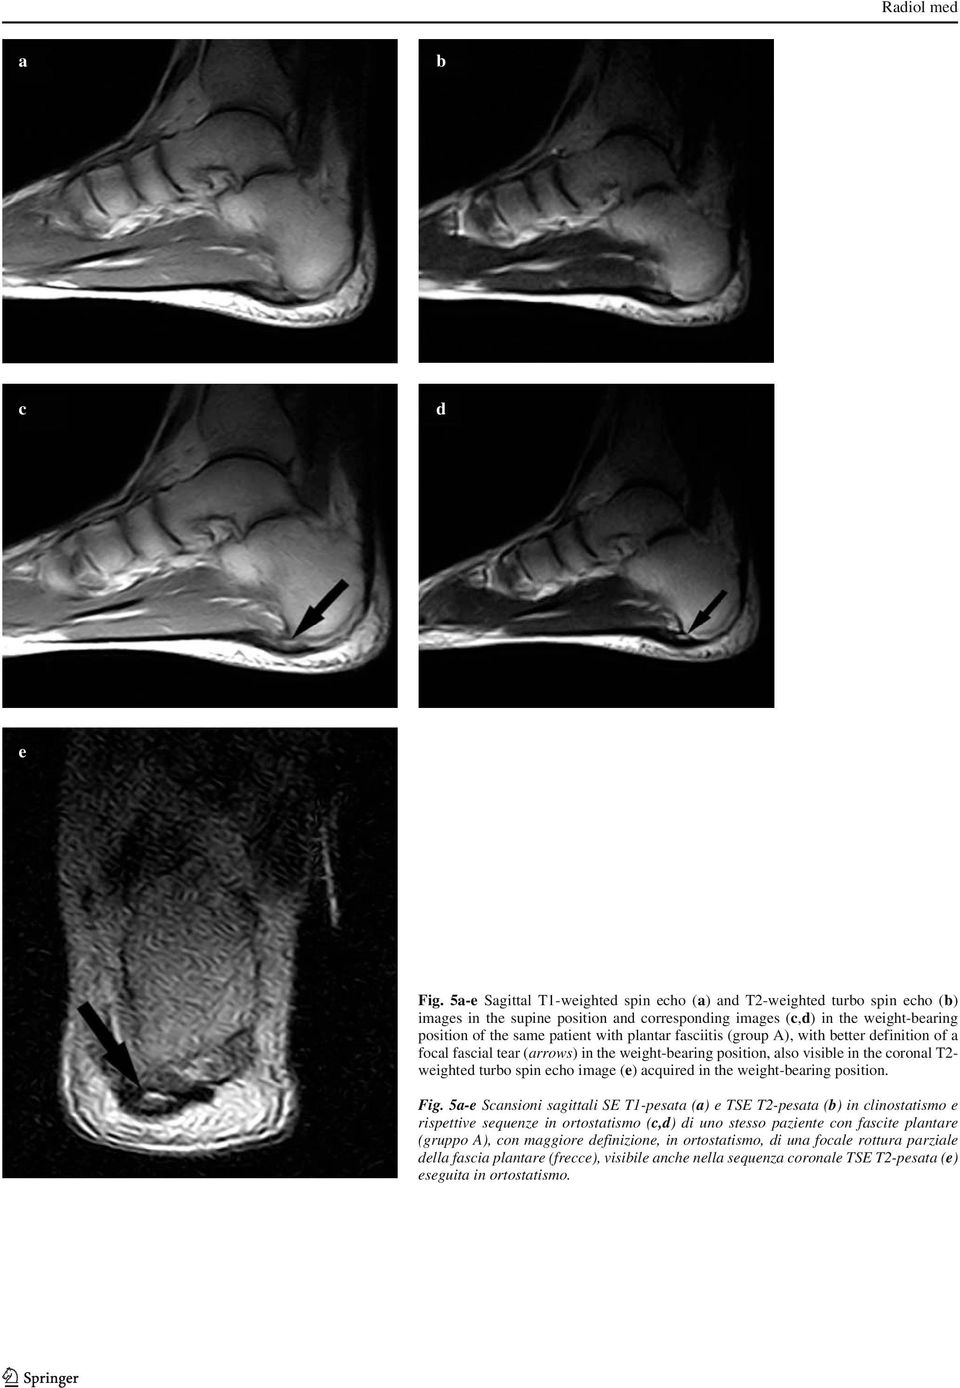 plantar fasciitis (group A), with better definition of a focal fascial tear (arrows) in the weight-bearing position, also visible in the coronal T2- weighted turbo spin echo image (e) acquired in the